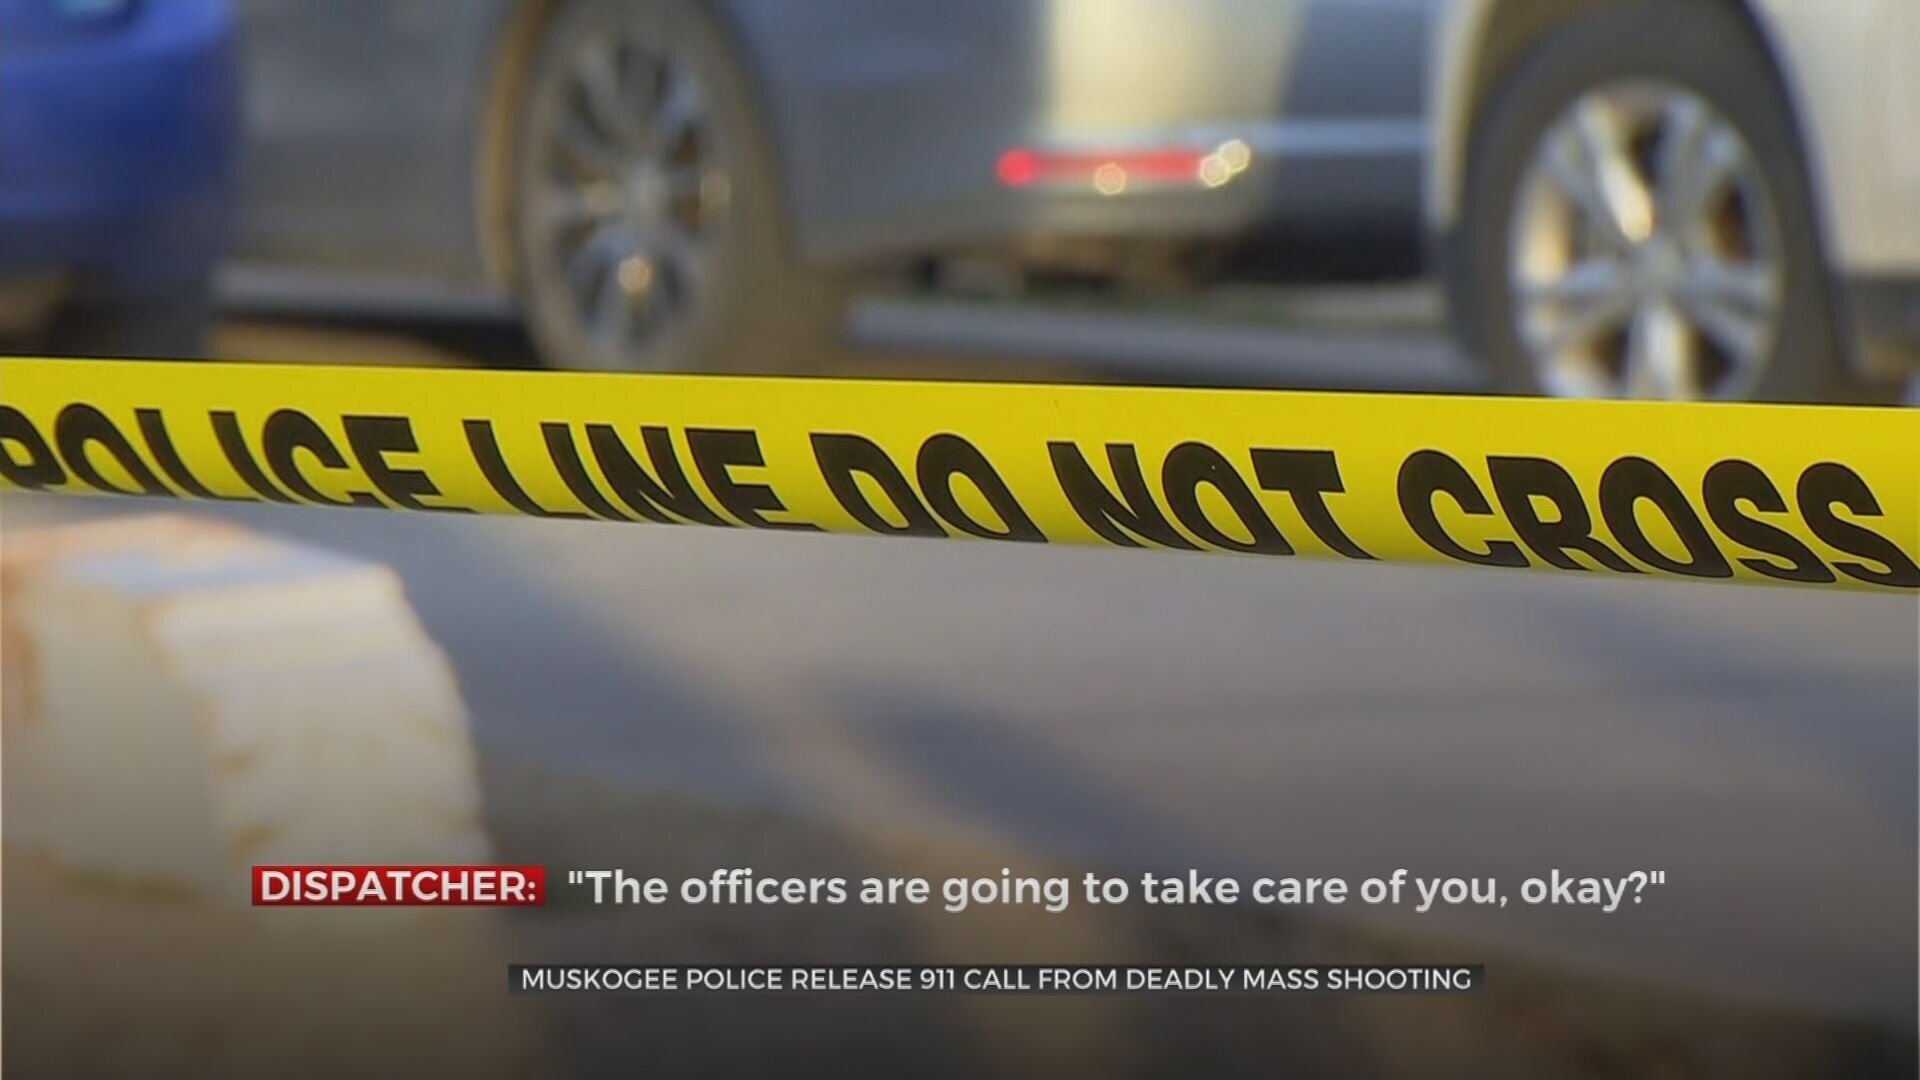 Muskogee Police Release 911 Call From Deadly Mass Shooting 